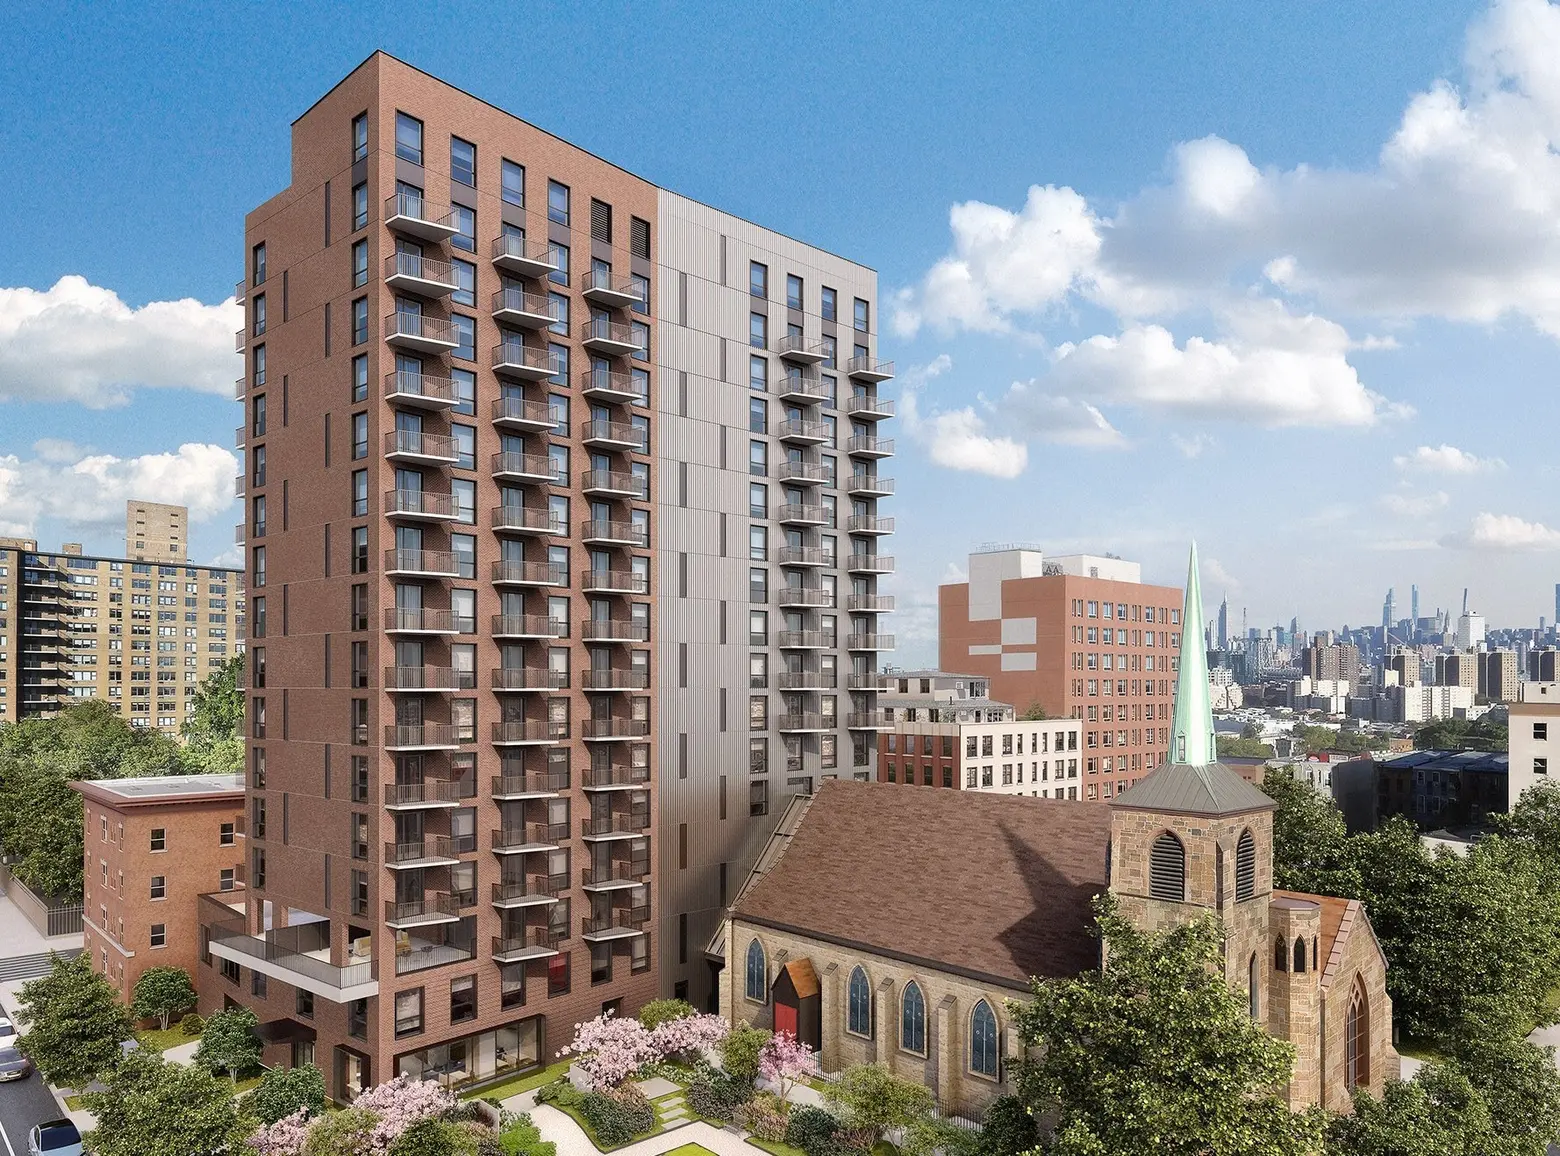 17-story Clinton Hill rental opens lottery for middle-income units, from $2,700/month